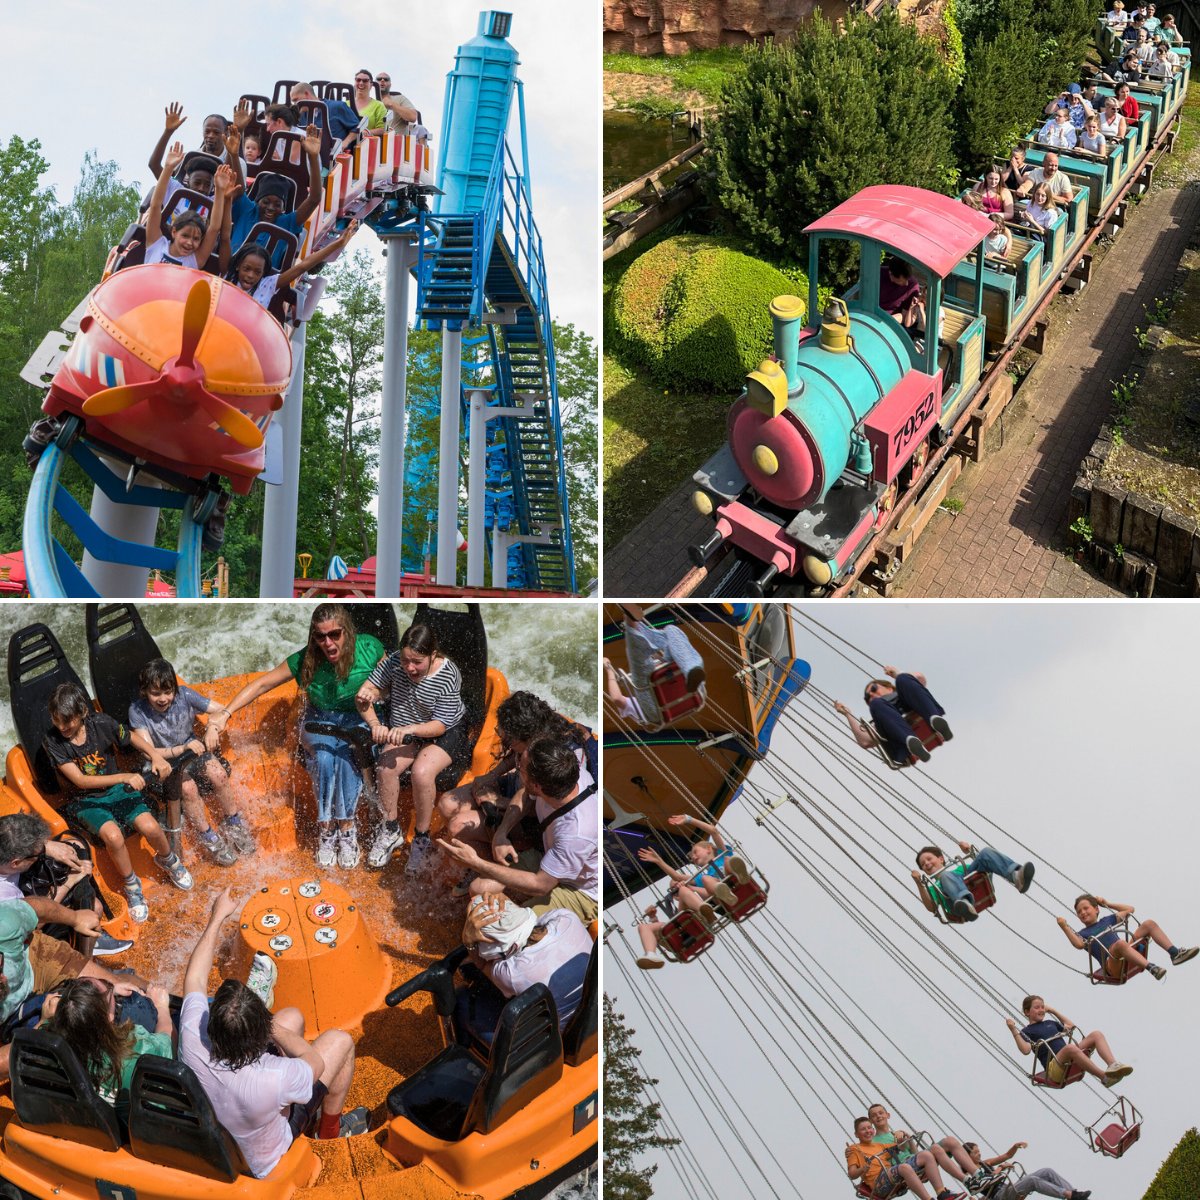 Having fun among colleagues contributes to feeling good at work. 🎉 And that was exactly the goal of our Family Fun Day 👨‍👩‍👦 which took place last Sunday at @WalibiBelgium. Nearly 10,000 employees and their families enjoyed a radiant day there! #LifeAtProximus #FunDay #FamilyDay